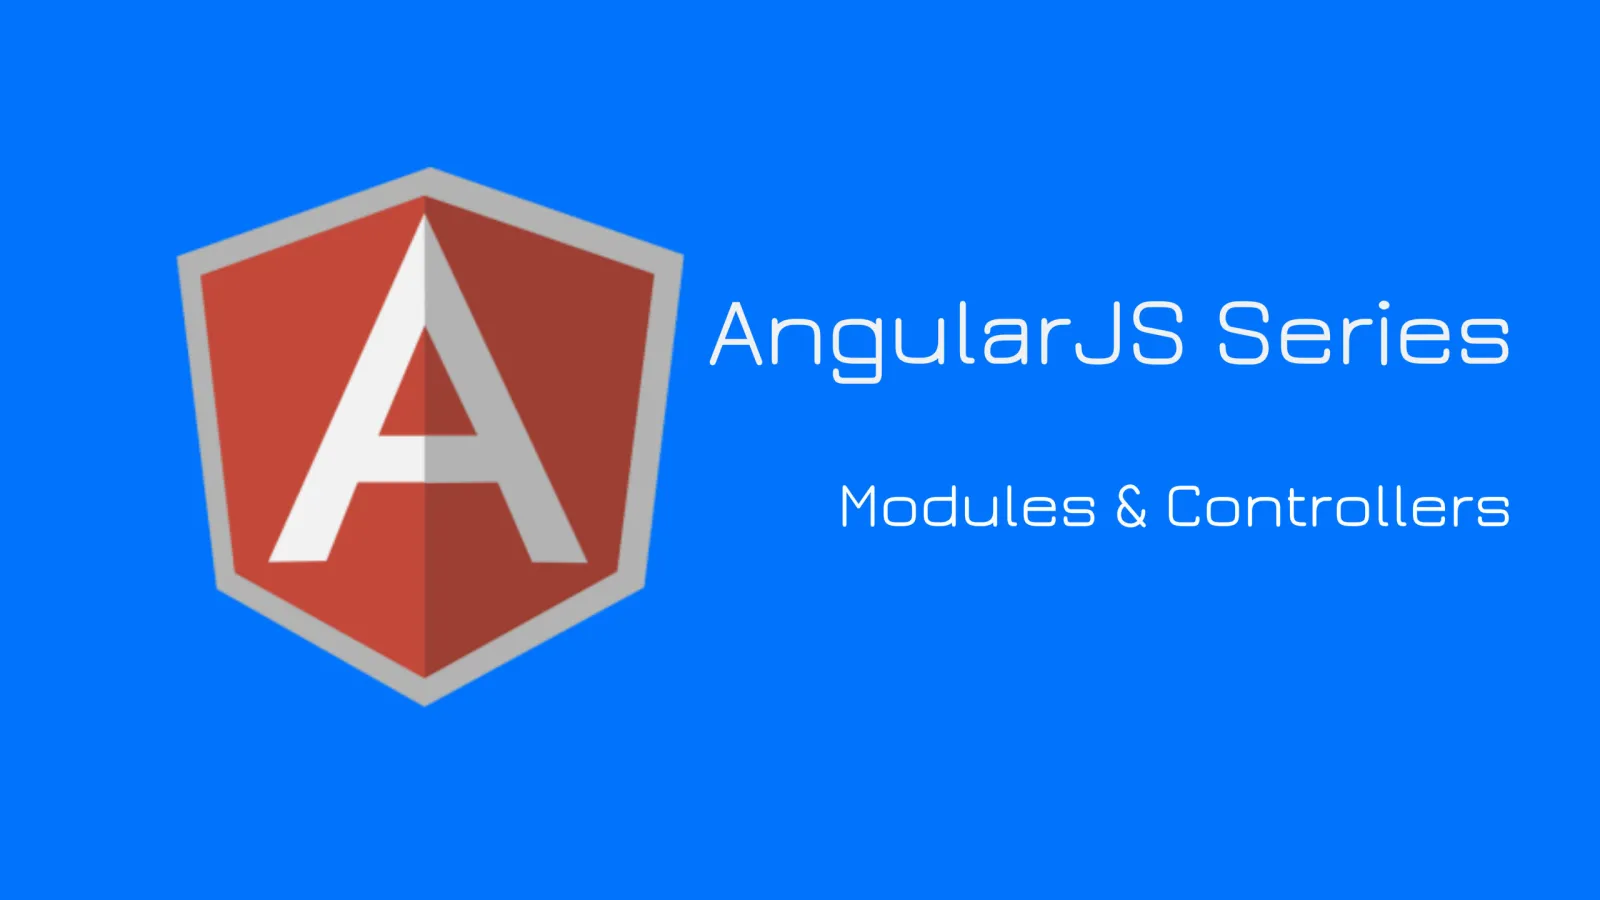 Modules & Controllers in AngularJs